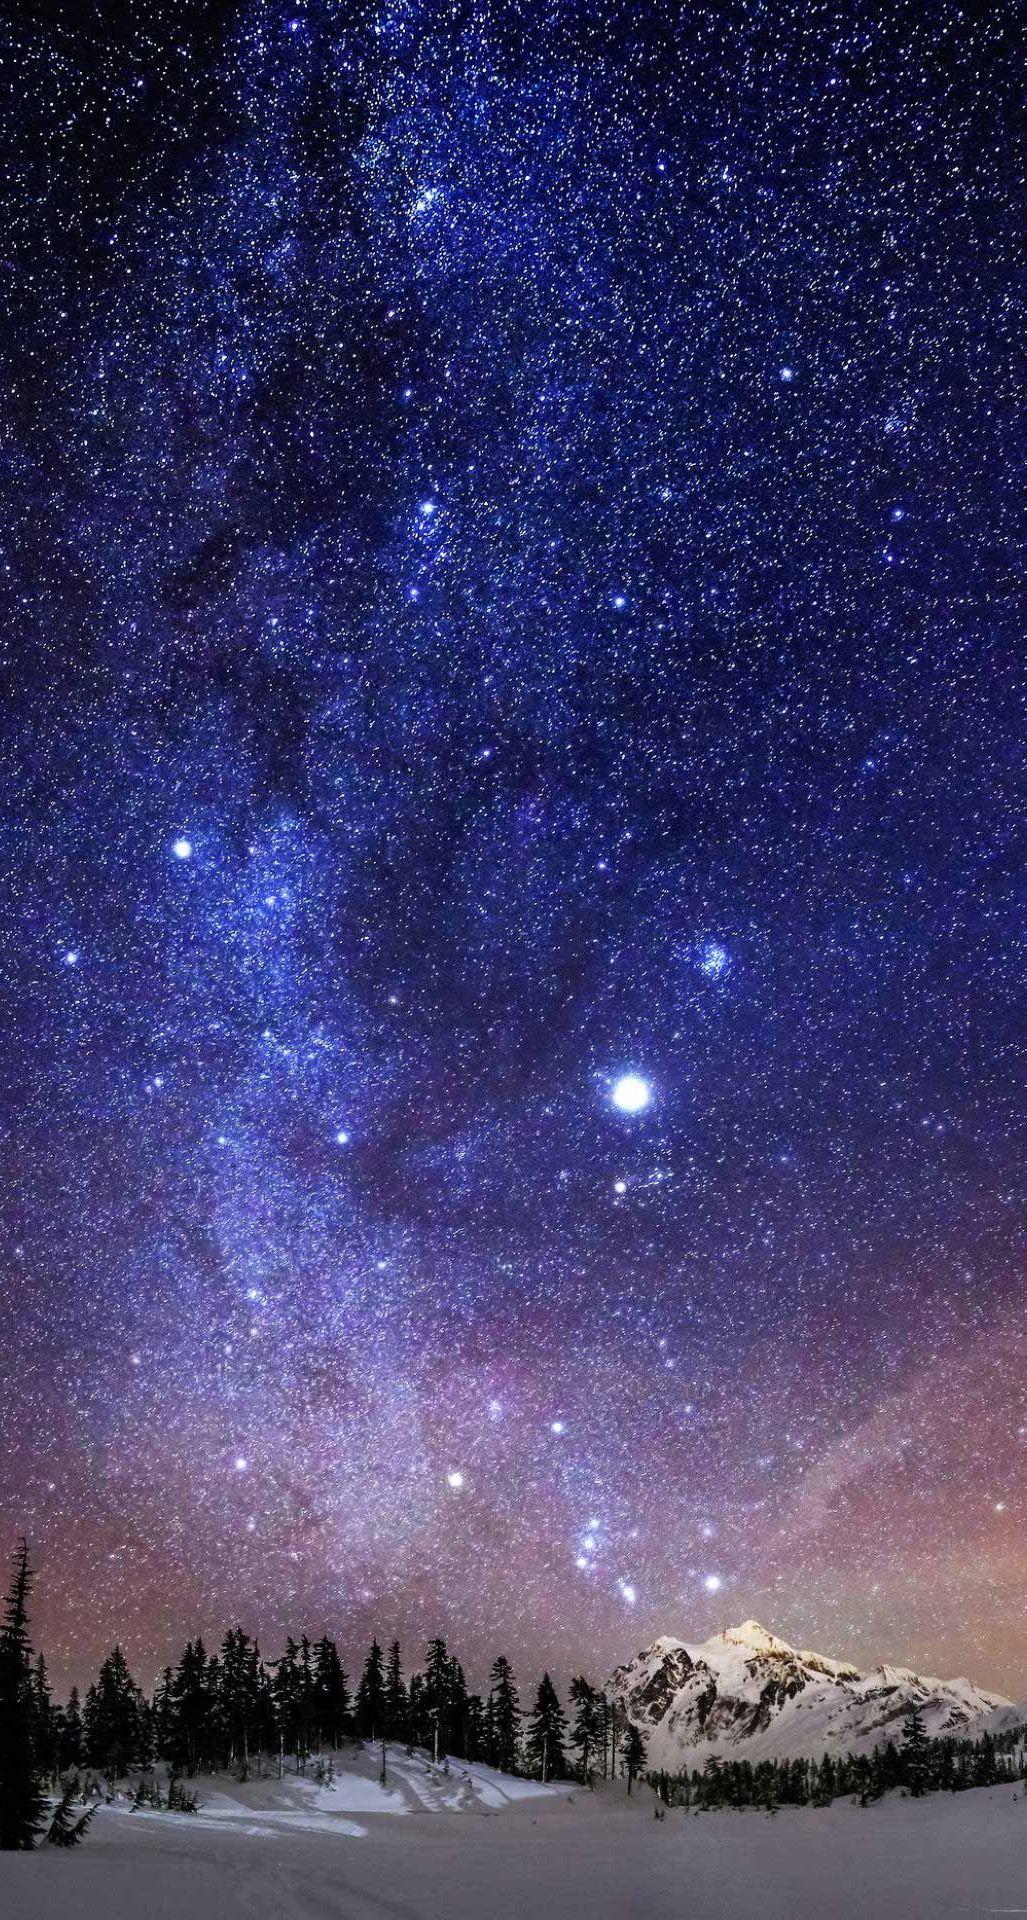 Apple Photoshopped a Galaxy Out of Its Default Wallpaper Photo  PetaPixel